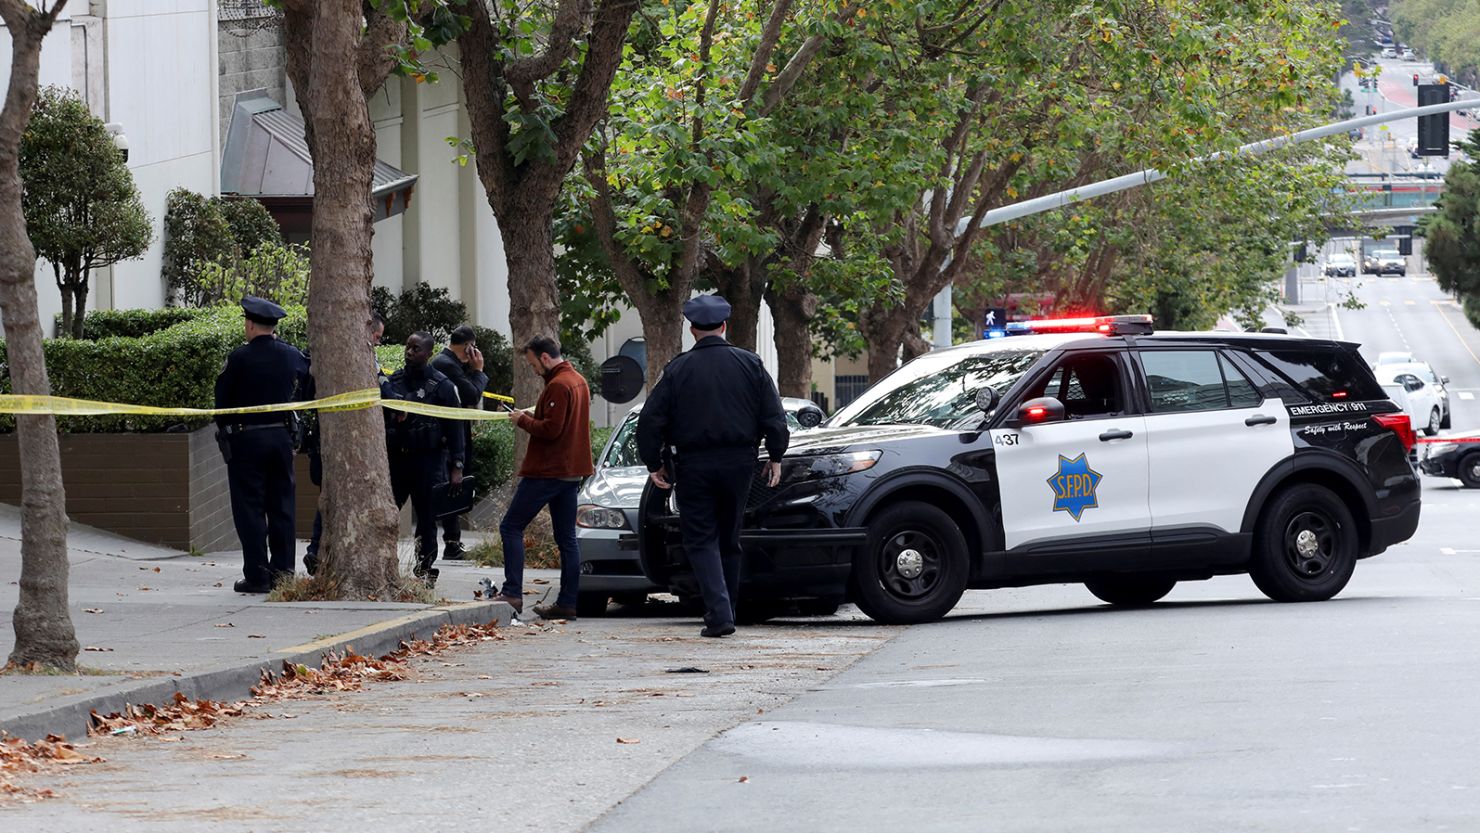 Law enforcement respond to the Chinese consulate in San Francisco on October 9 after a car crashed into the building.